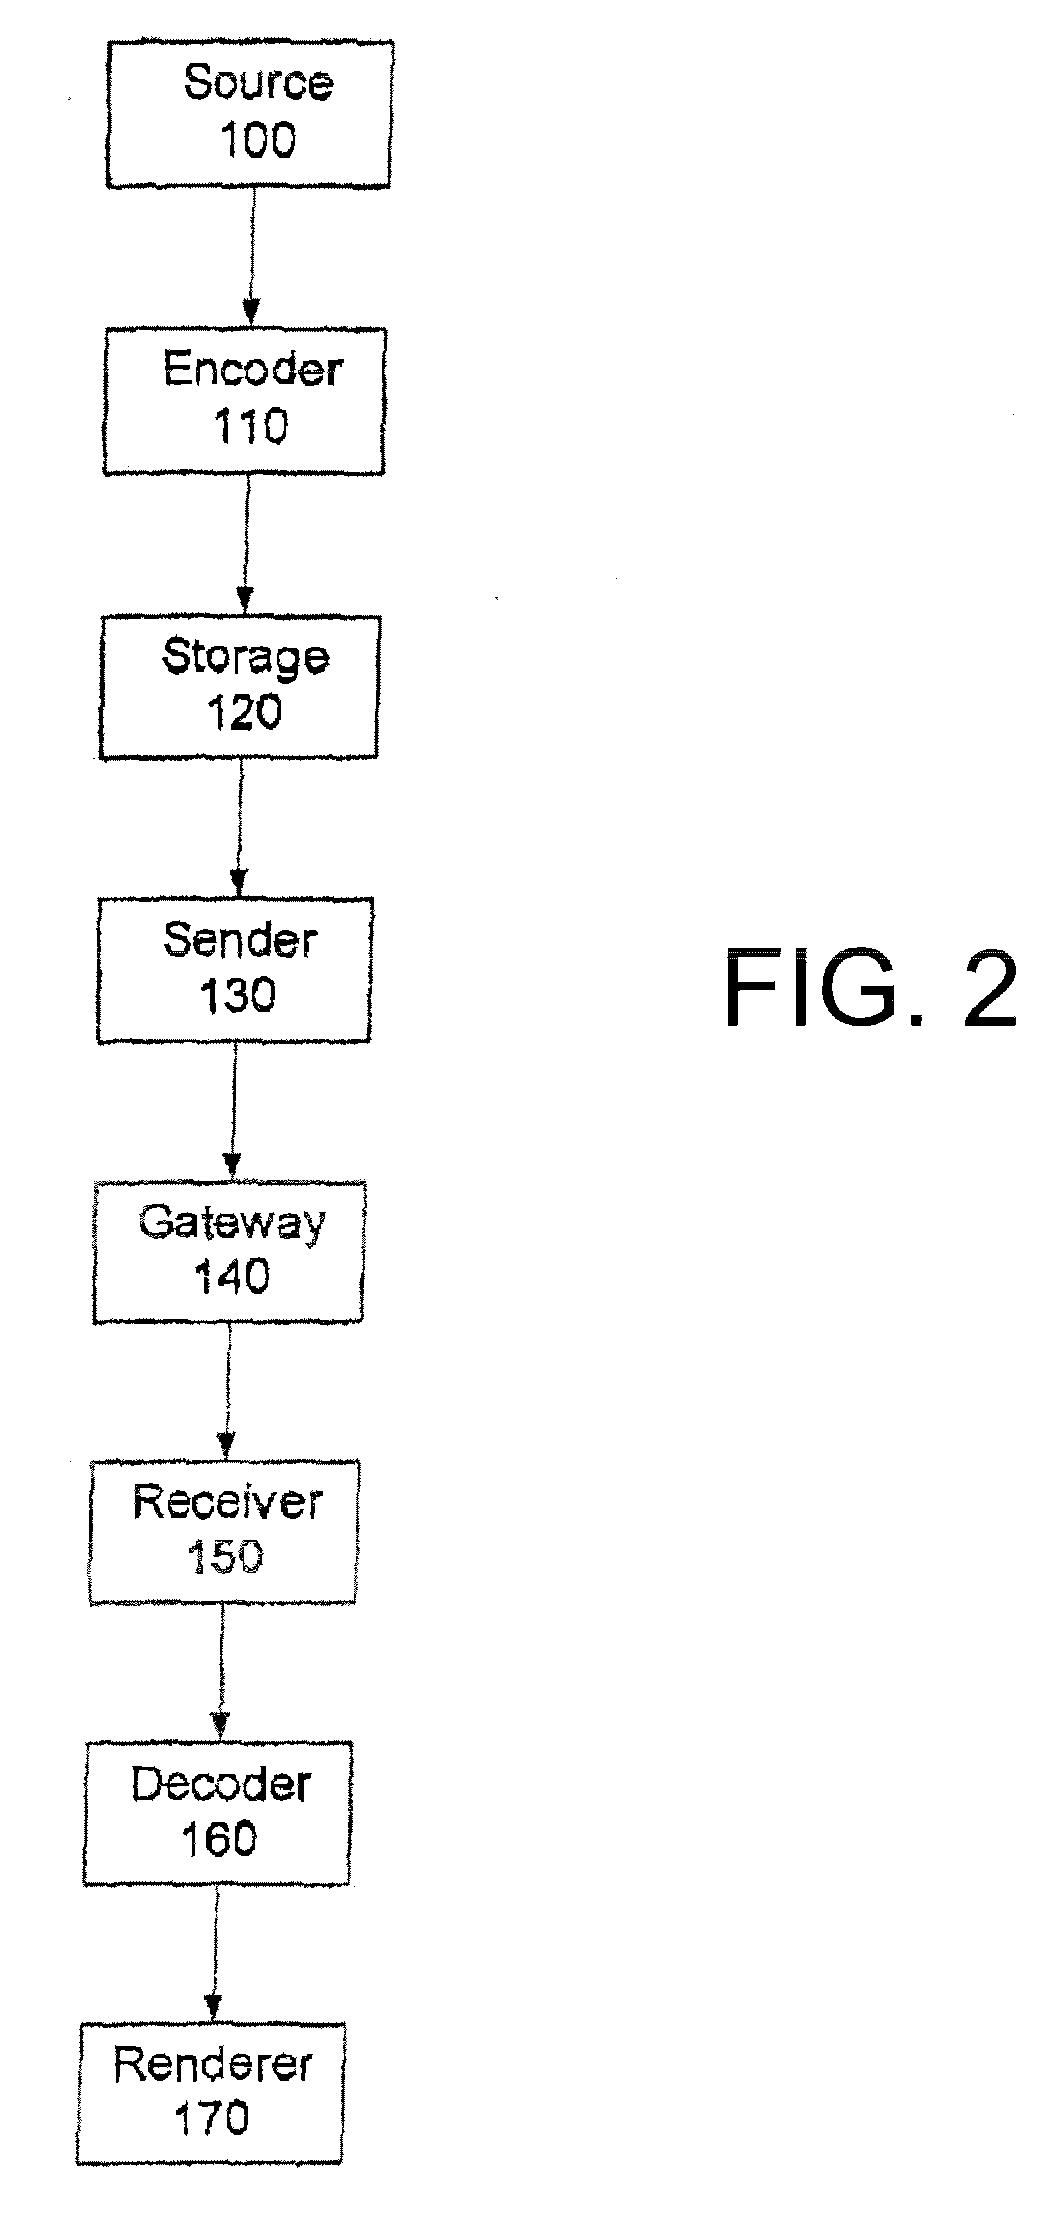 End-of-block markers spanning multiple blocks for use in video coding